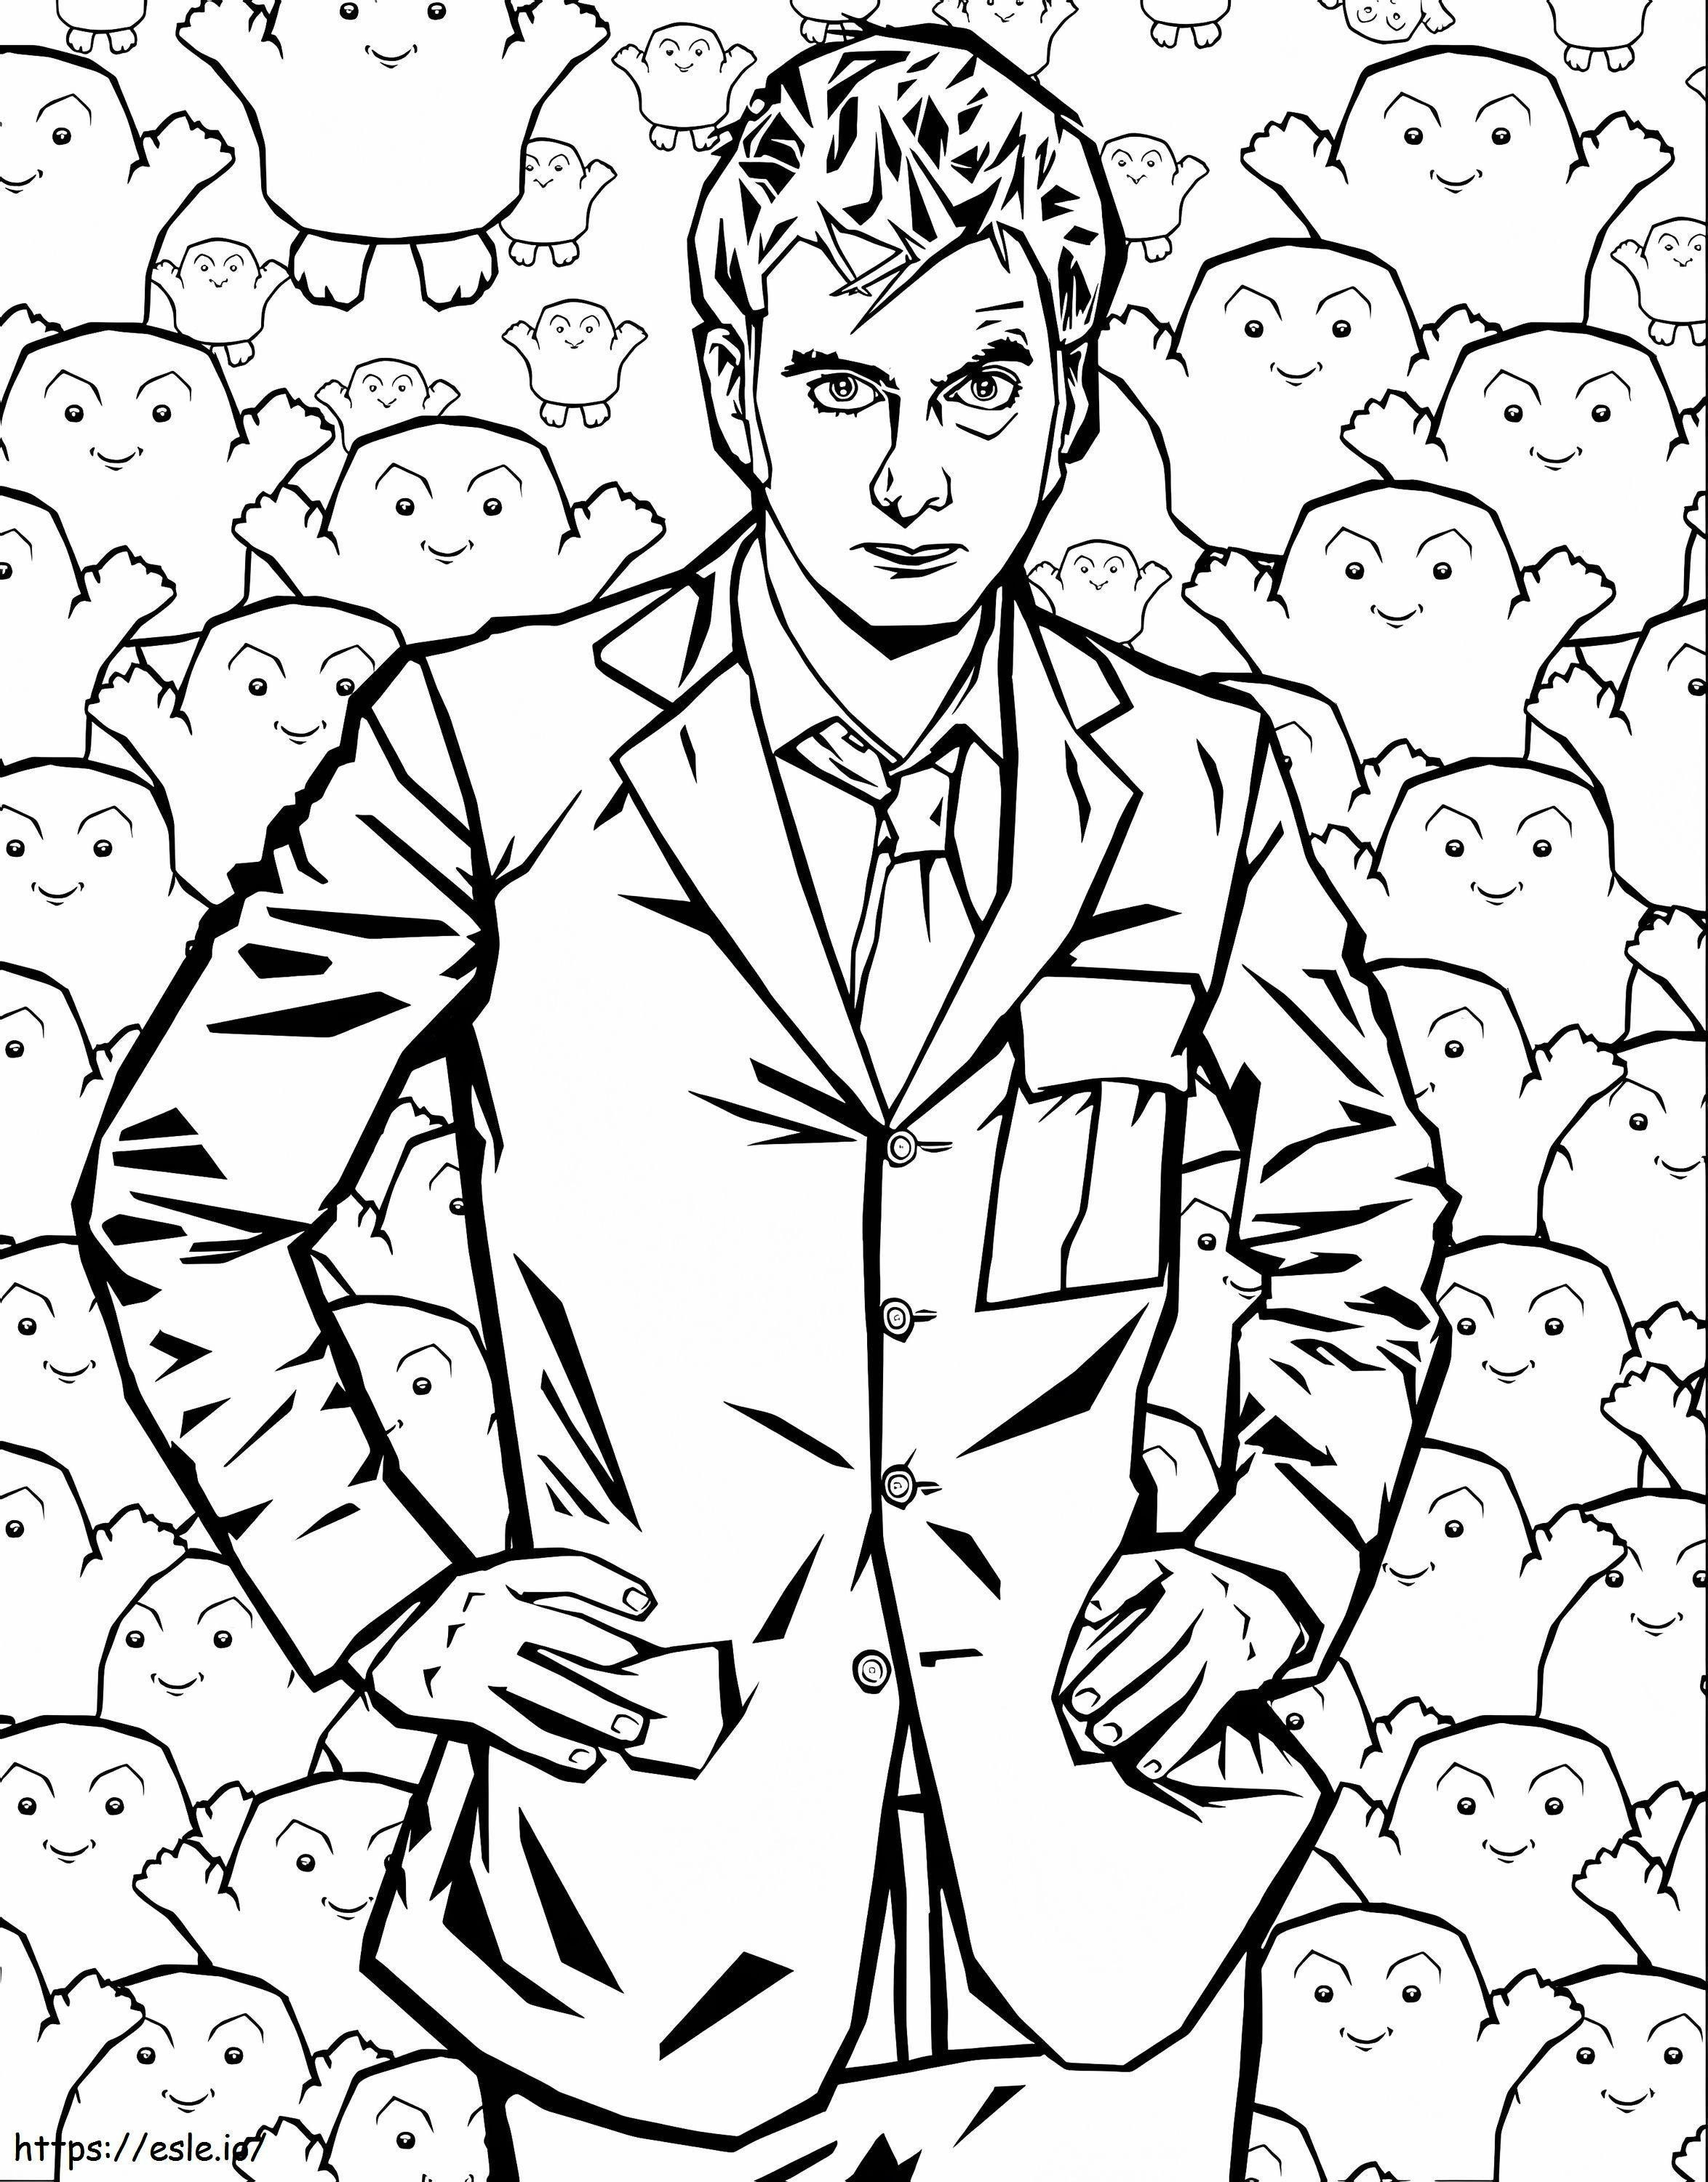 Tenth Doctor coloring page